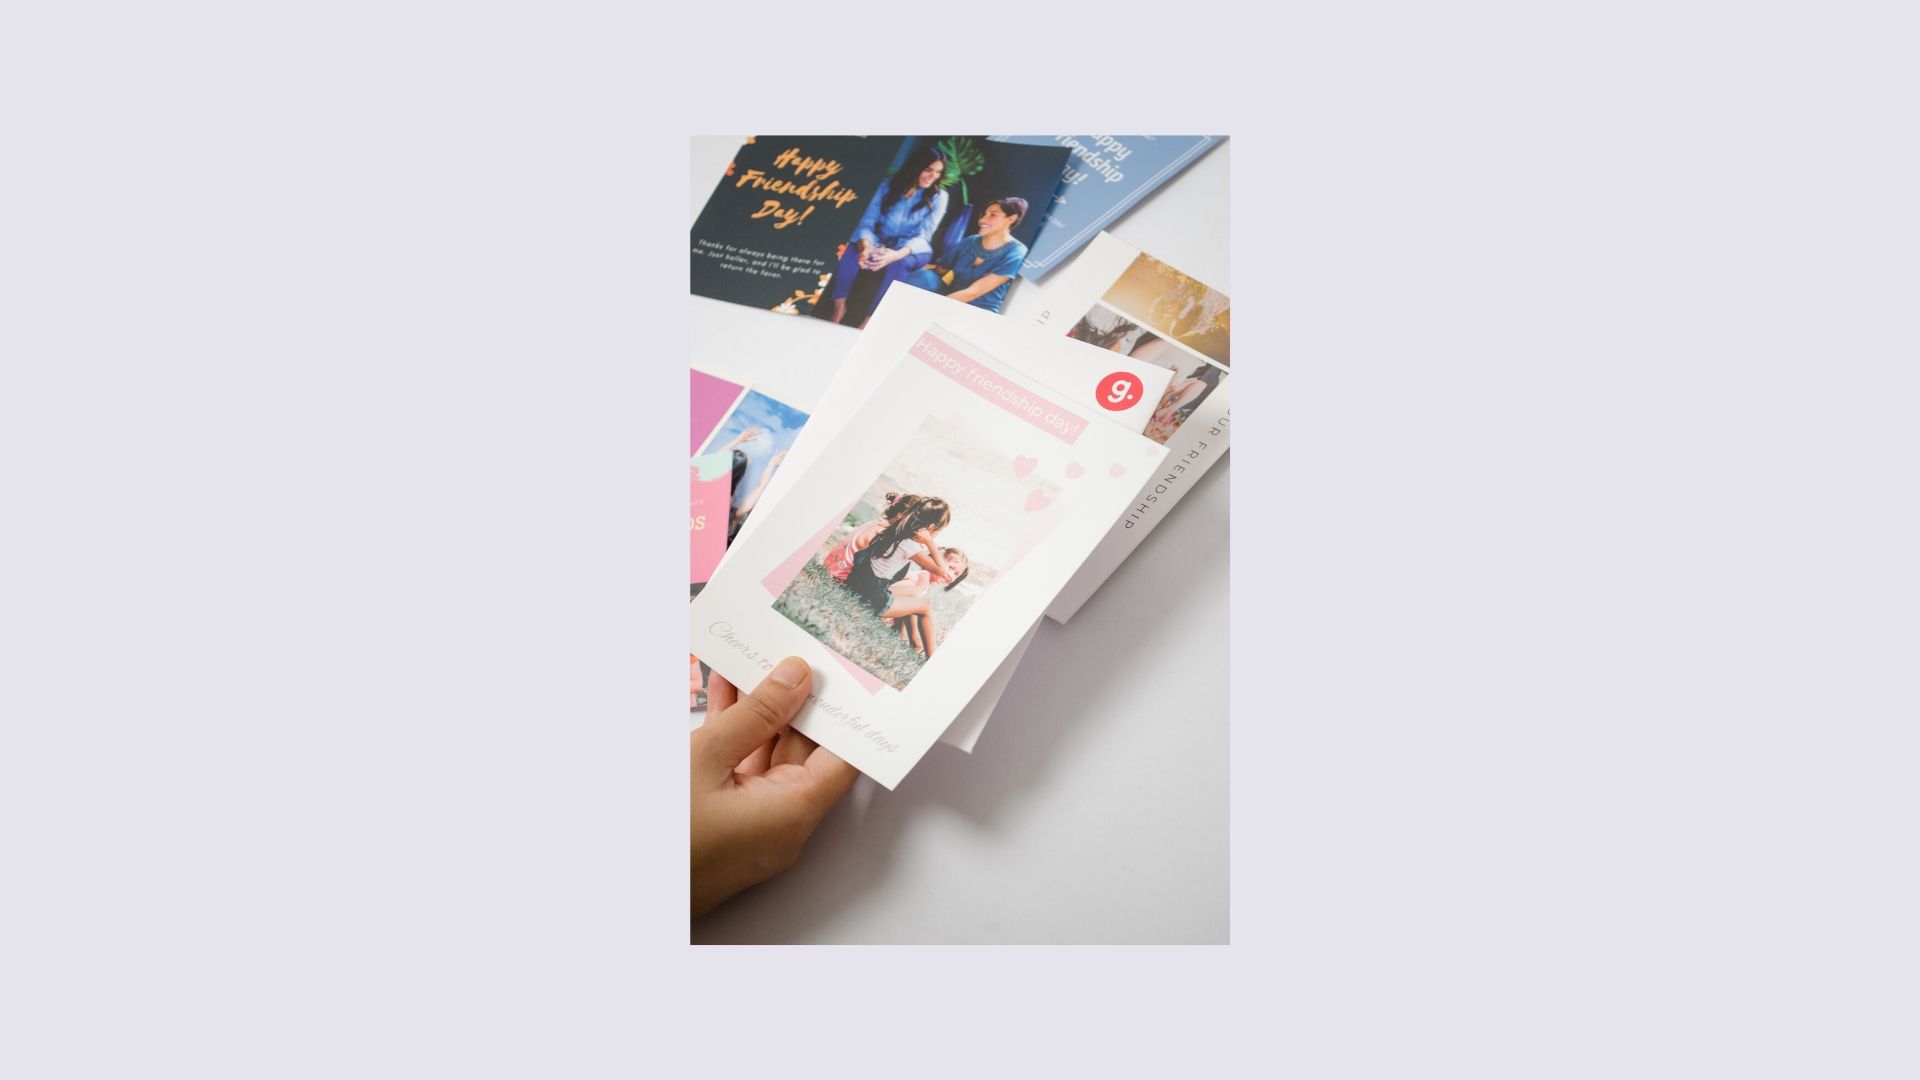 friendship photo cards from gicly